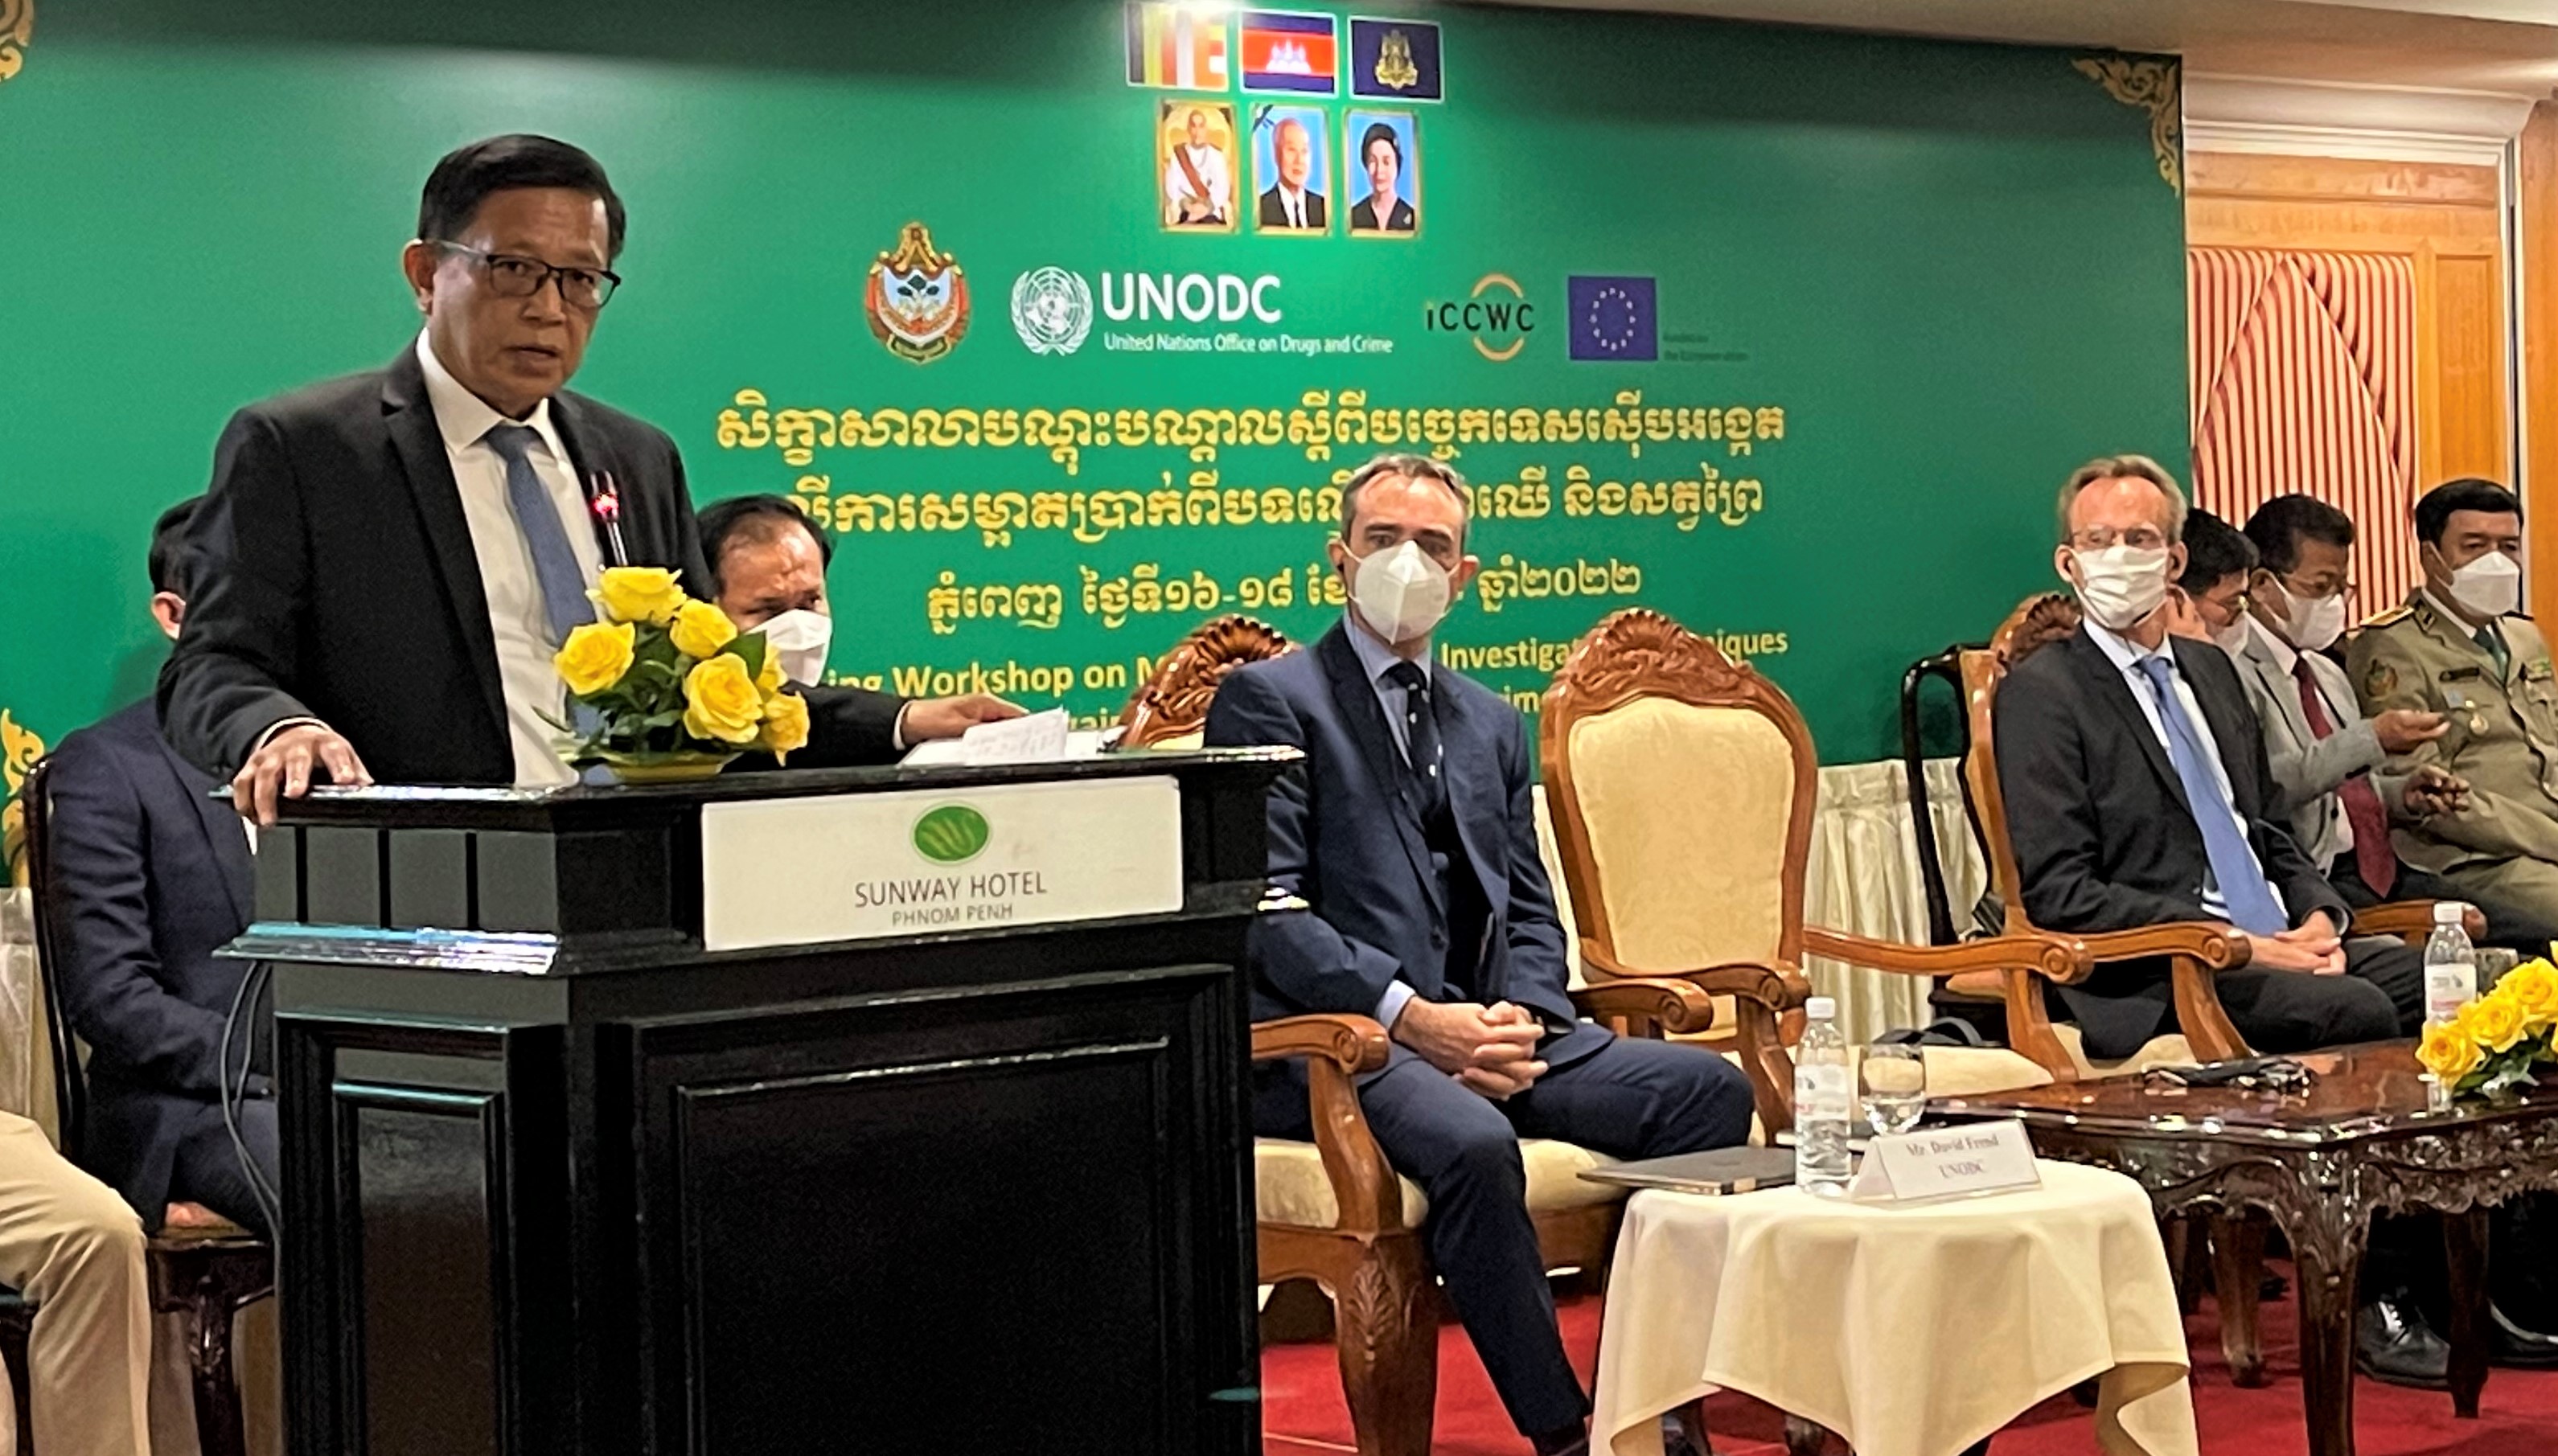 <p style="text-align: justify;"><em>H.E. Nut Chansohka providing opening remarks alongside Mr. David Frend, AML/CFT Adviser and Mentor – Mekong Region at UNODC and Clemens Beckers, Attaché Natural Resources Management – Climate Change at the EU Delegation to the Kingdom of Cambodia</em></p>